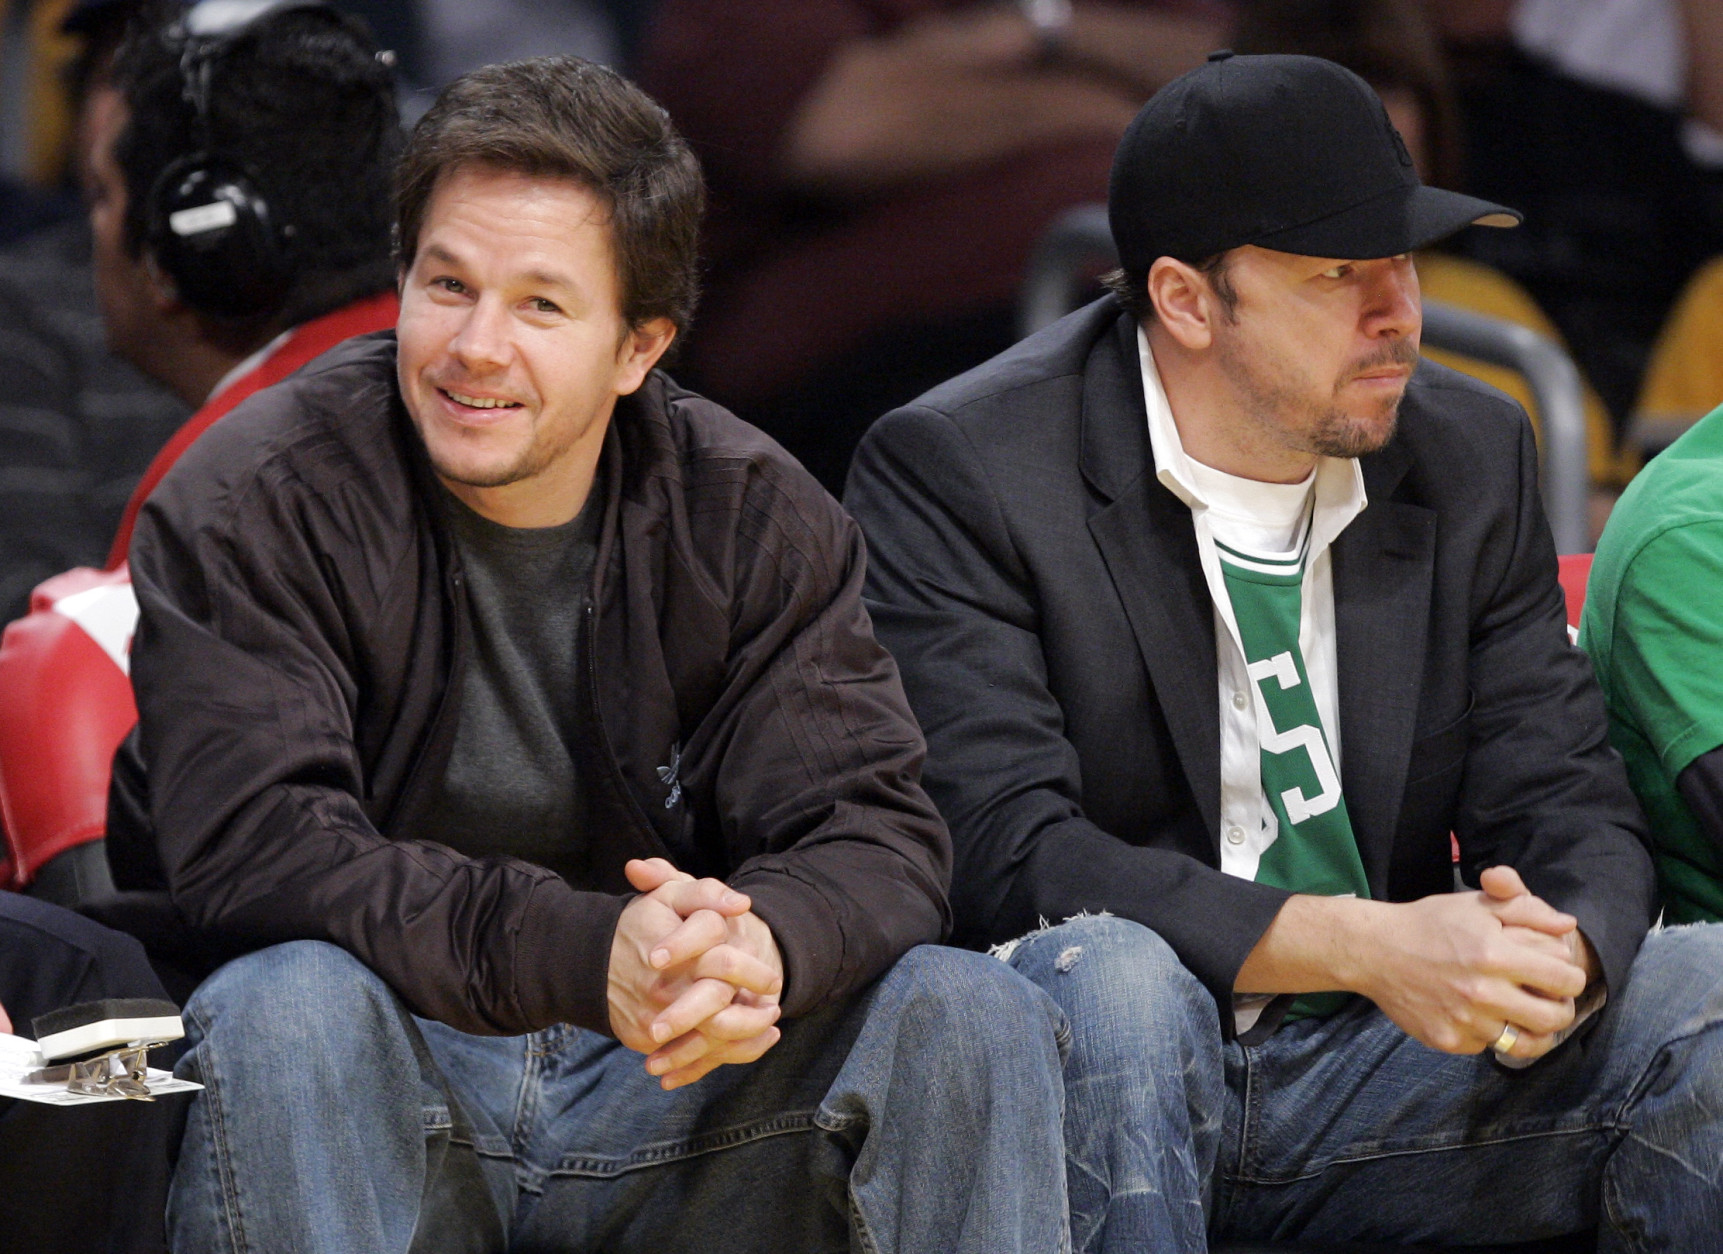 Actor Mark Wahlberg, left, sits with his brother Donnie as they watch the Boston Celtics play the Los Angeles Lakers in their NBA basketball game, Sunday, Dec. 30, 2007, in Los Angeles. (AP Photo/Mark J. Terrill)